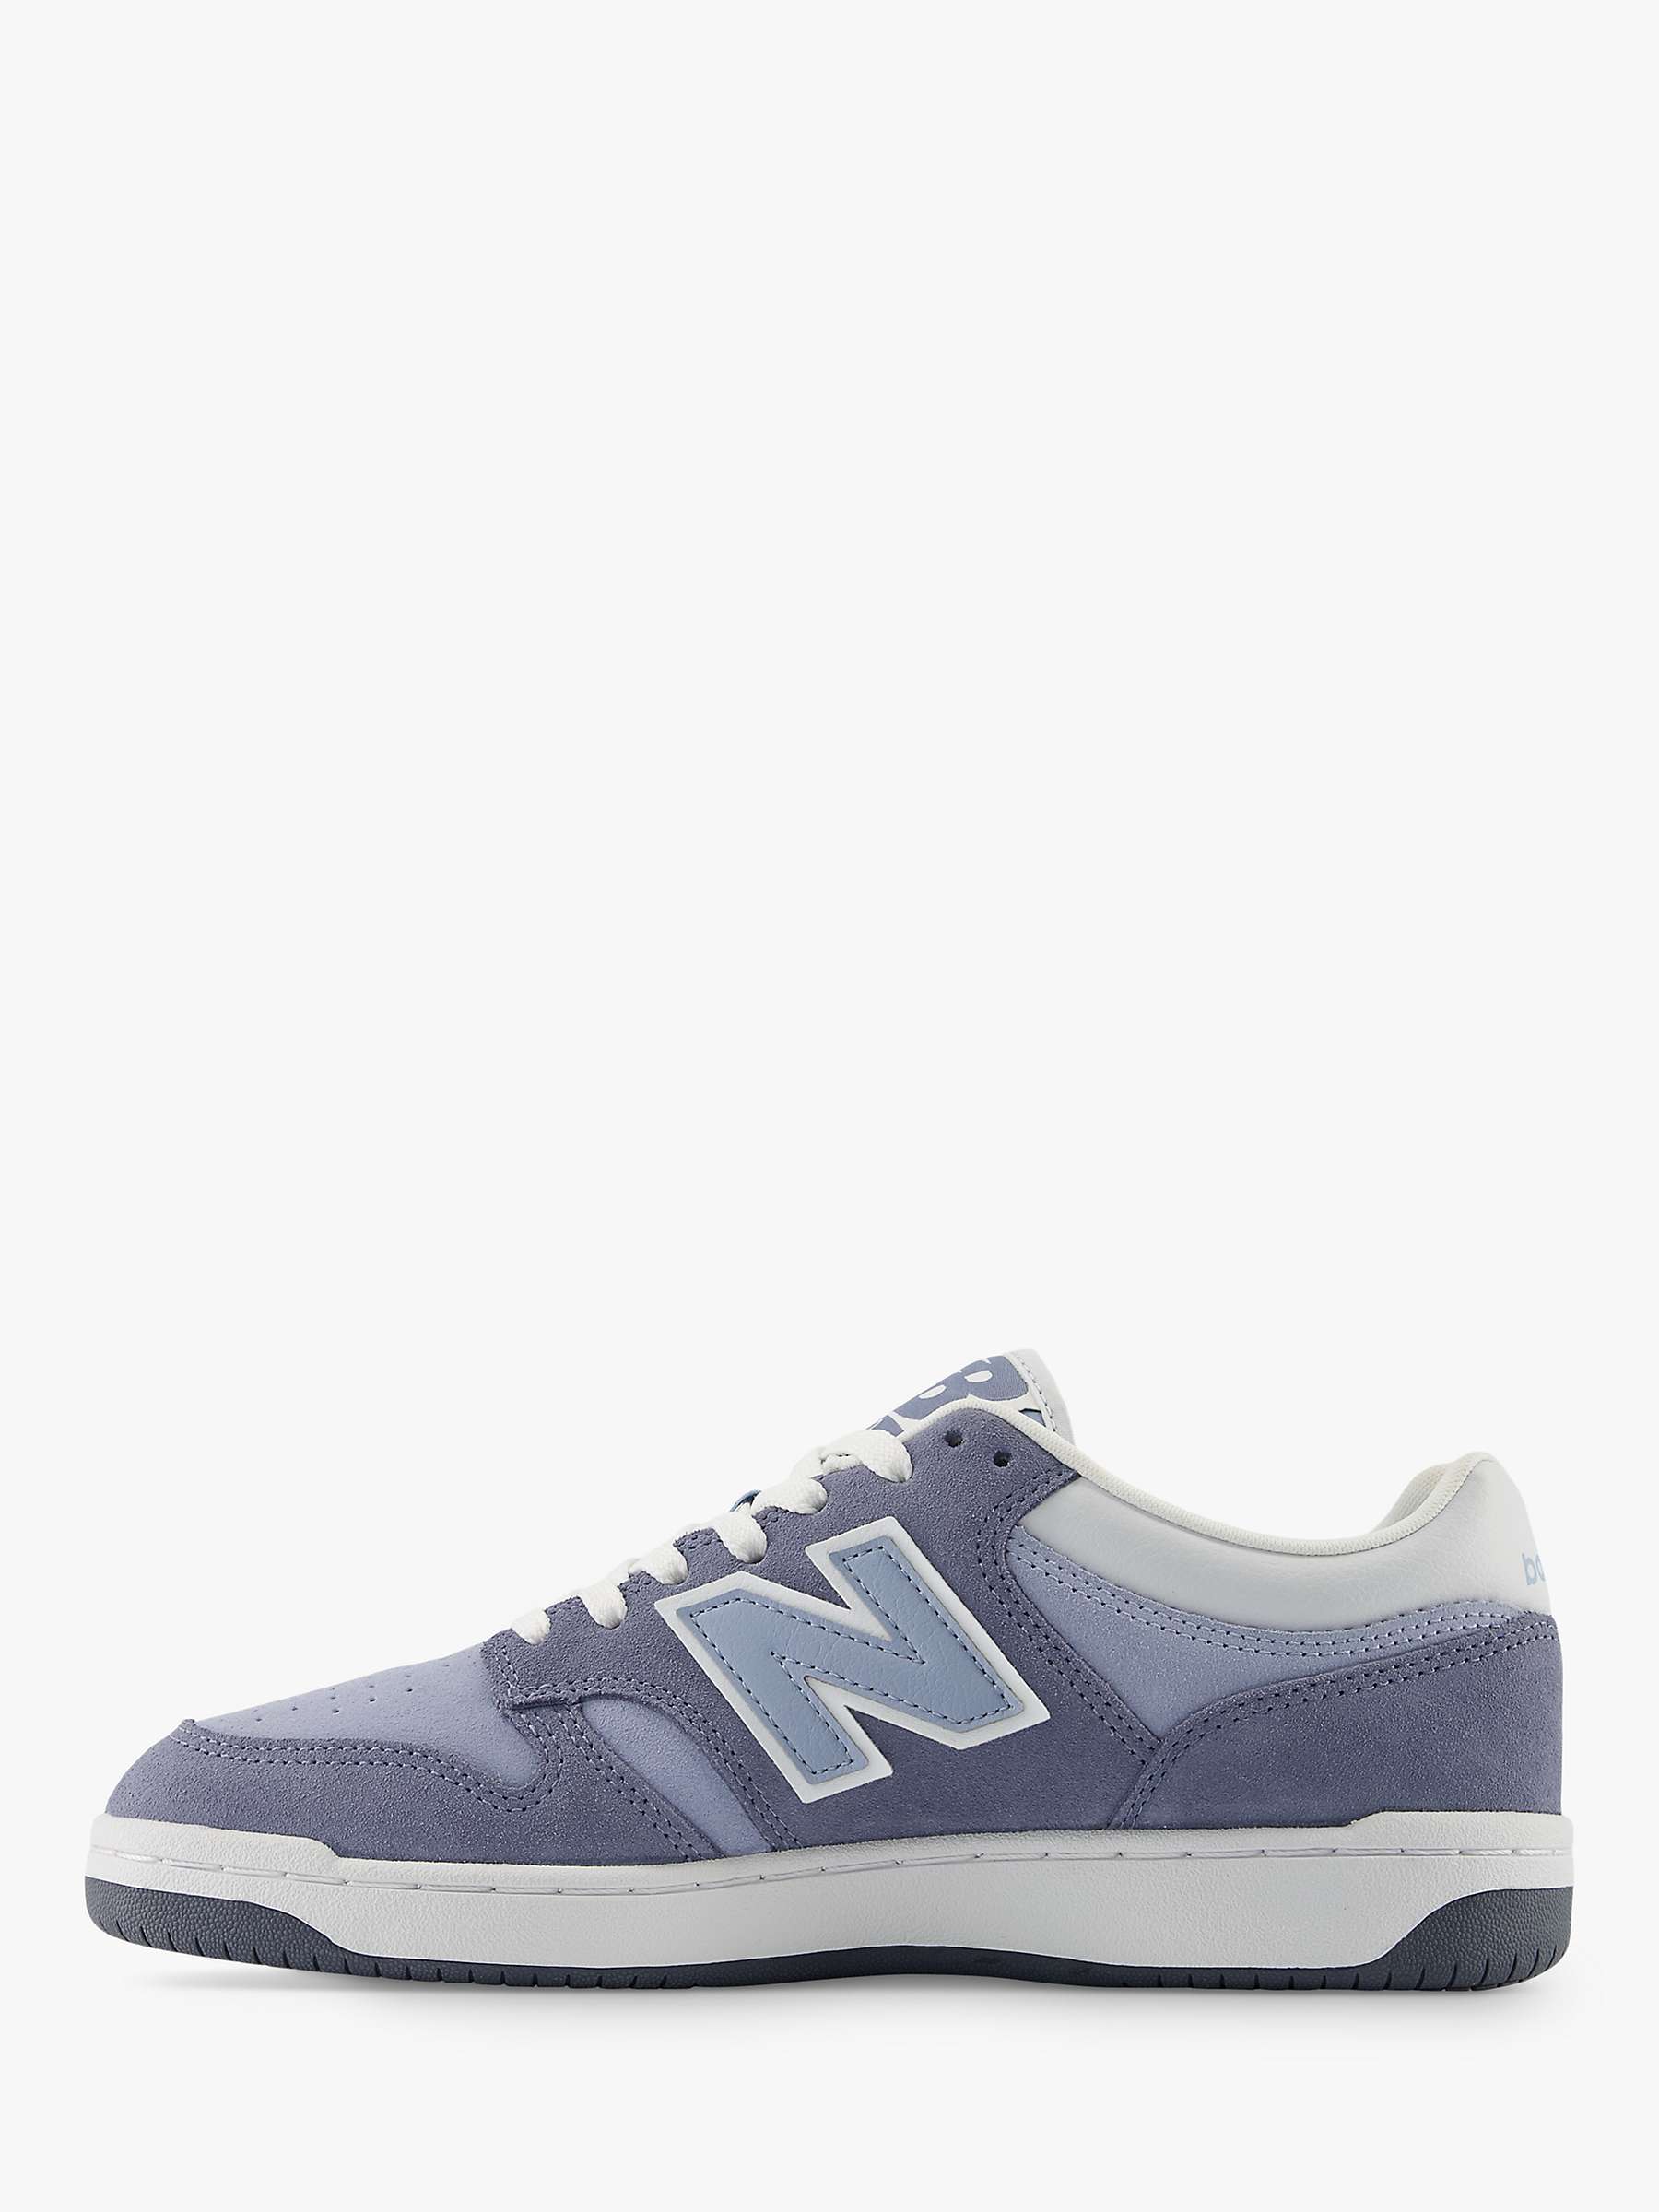 Buy New Balance 480 Lace Up Trainers Online at johnlewis.com